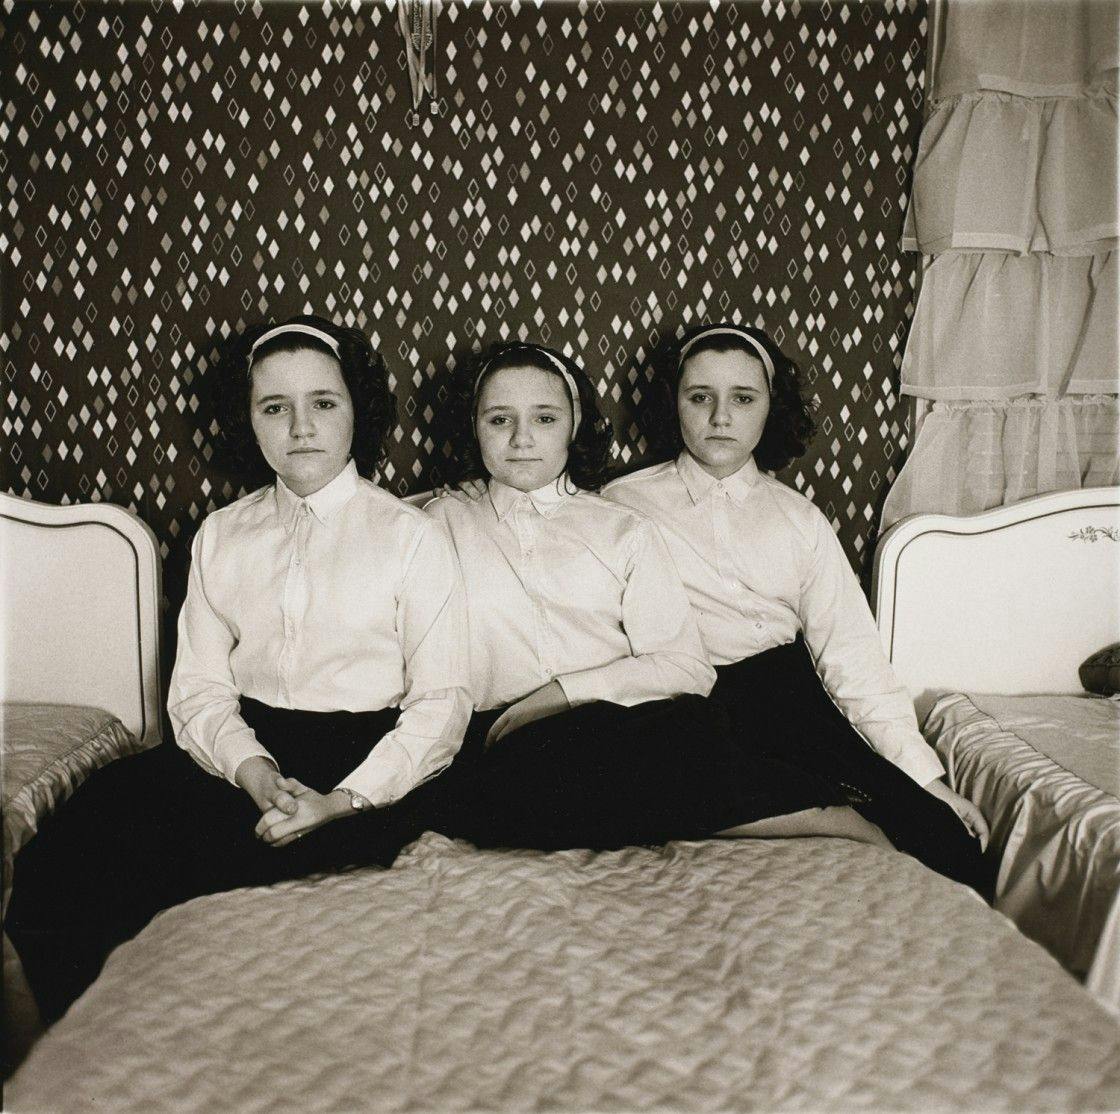 A photograph by Diane Arbus, titled Triplets in their bedroom, N.J. 1963, dated 1963. Copyright The Estate of Diane Arbus